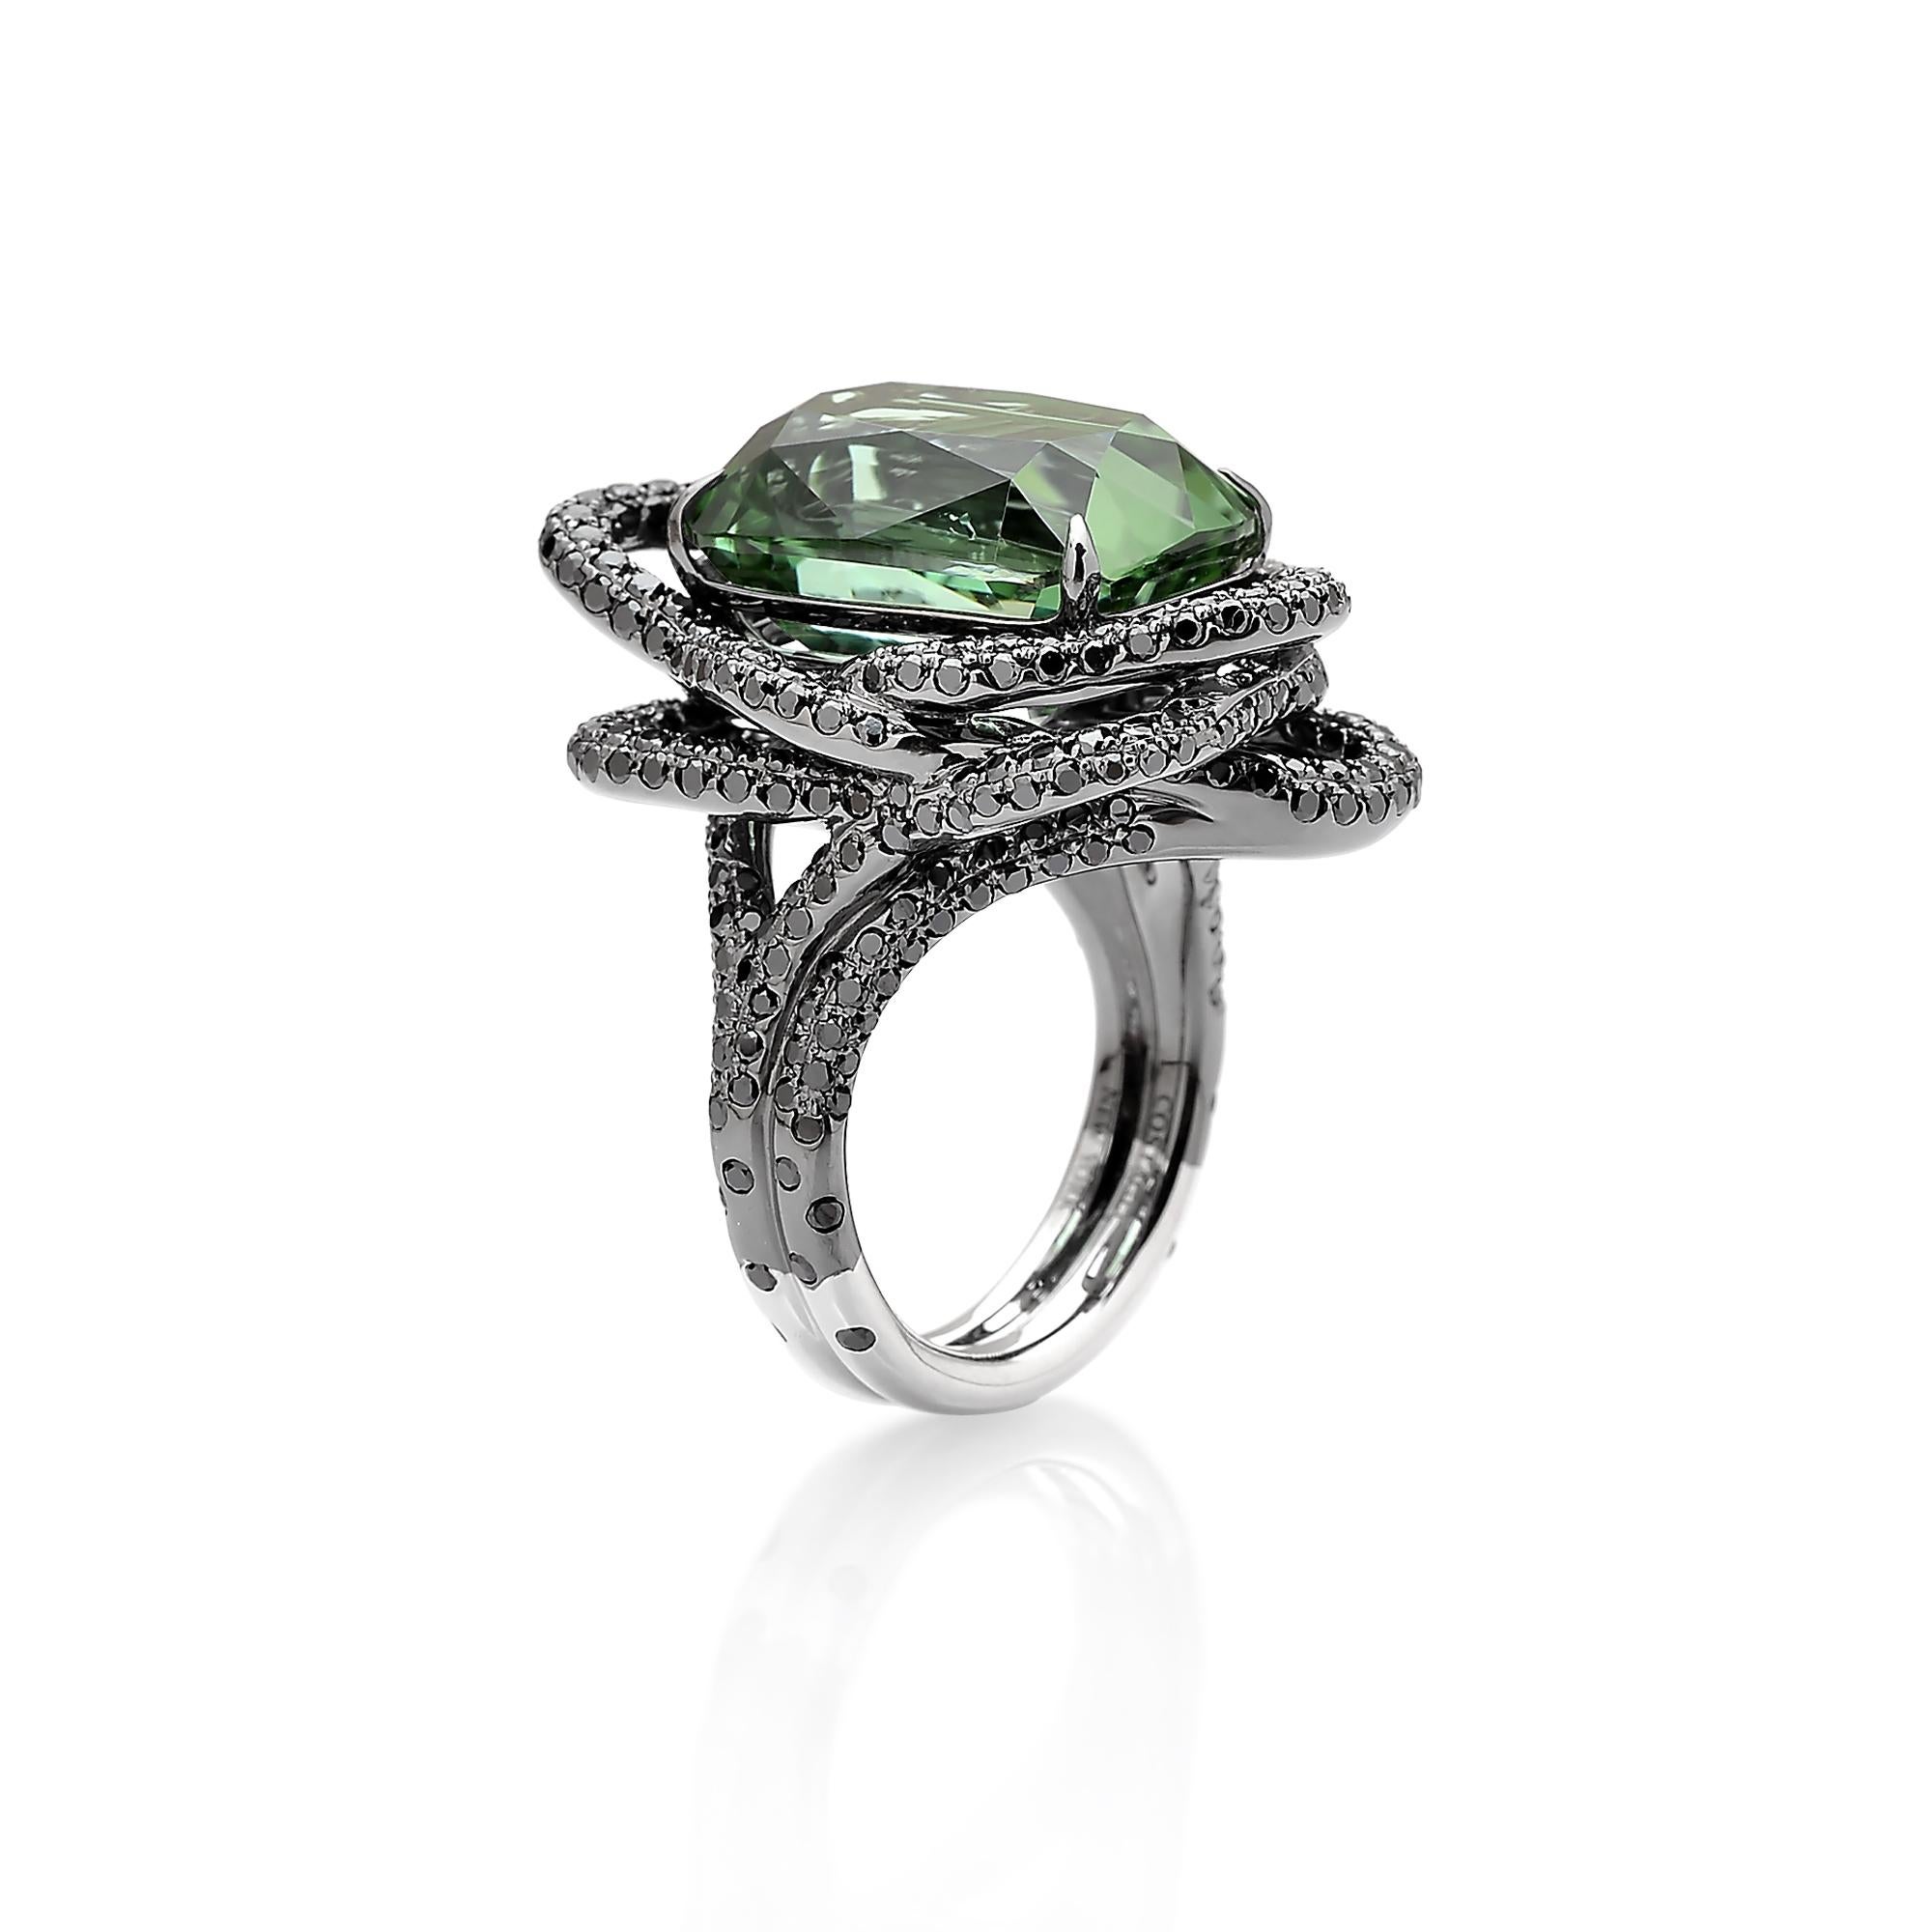 From the 'Intrecci' Collection, faceted cushion shape green tourmaline ring set in 18 karat white gold with black rhodium finish and pave-set black diamond detailing. 

The beauty is in the details - from the combination of hues, the cut of the